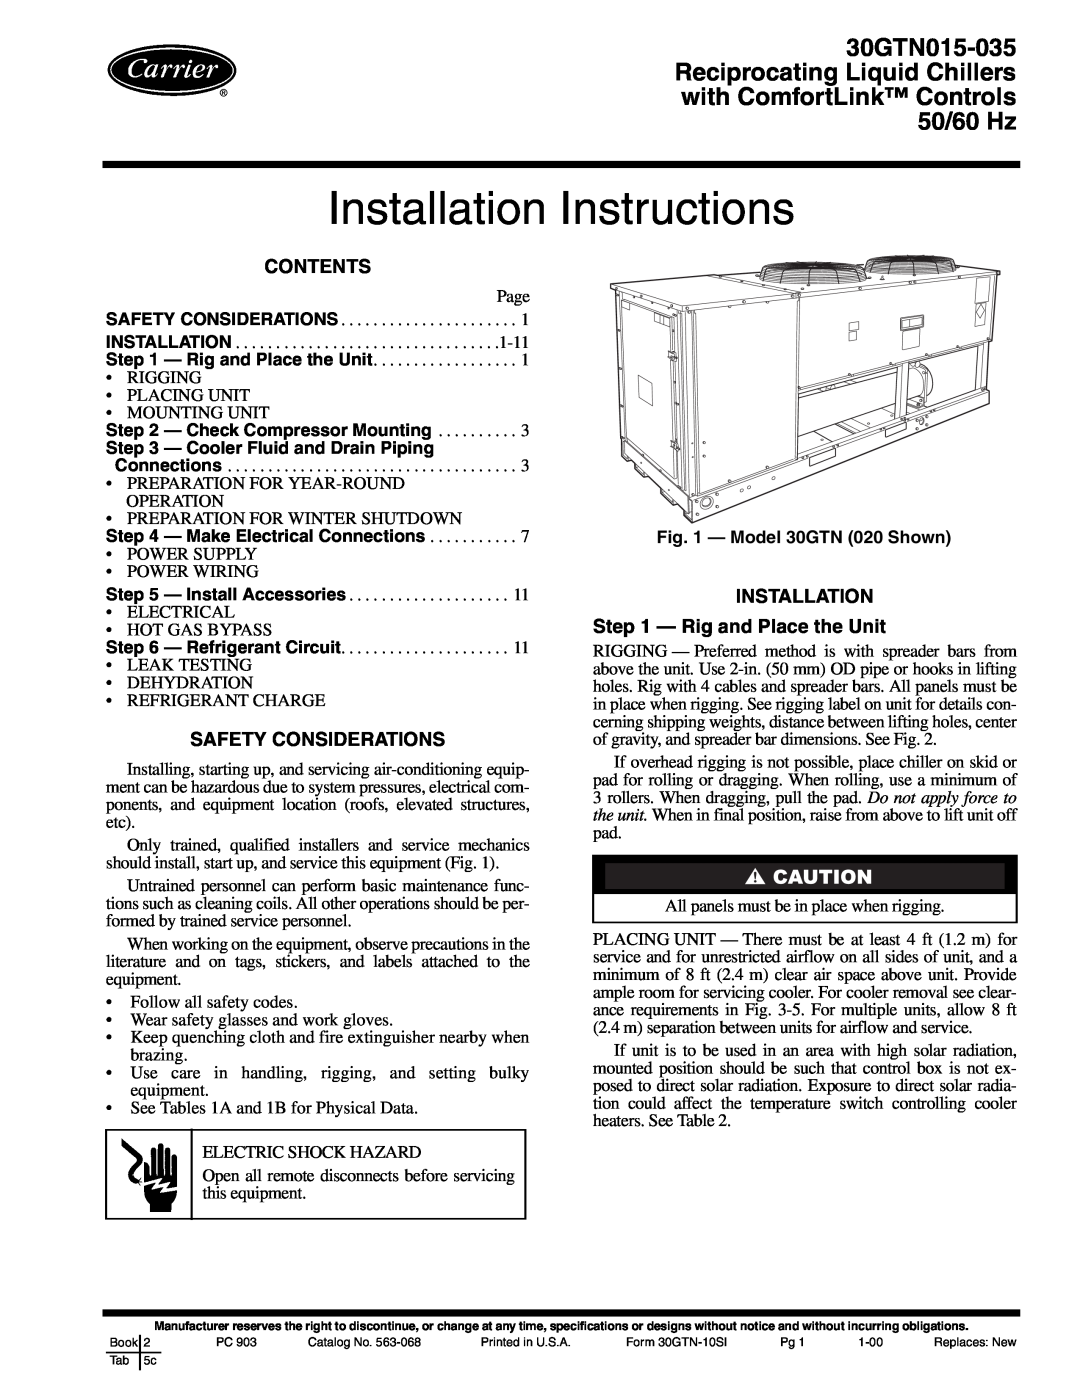 Carrier 30GTN015-035 installation instructions Contents, Safety Considerations, INSTALLATION - Rig and Place the Unit 